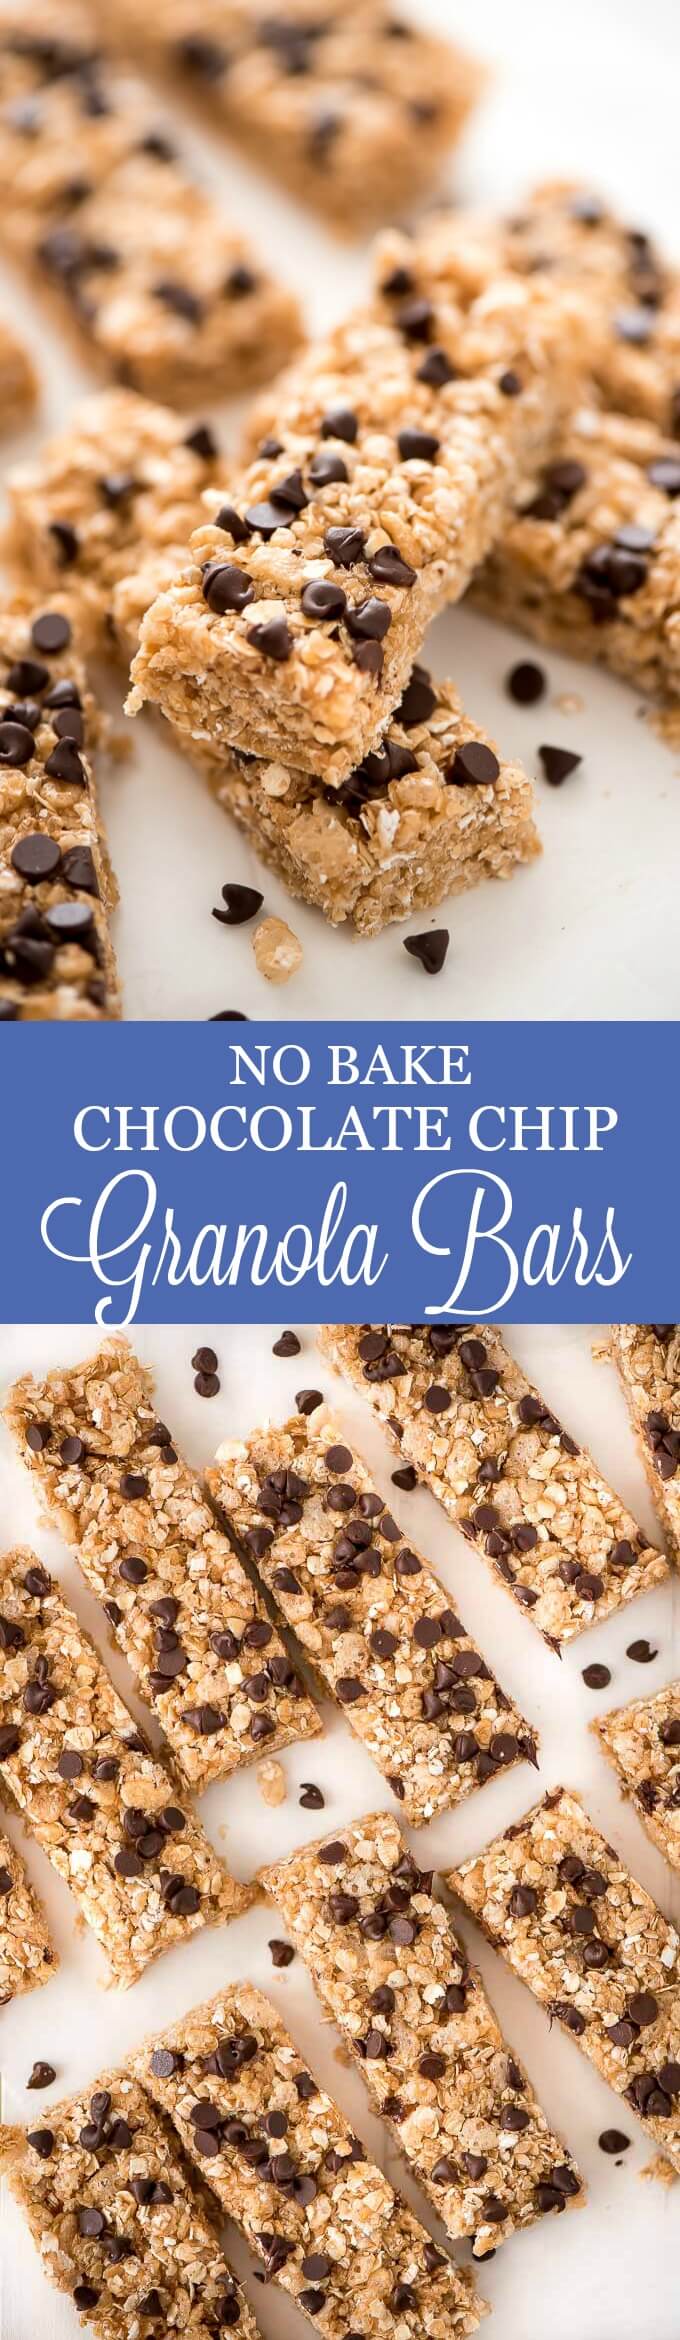 Make No Bake Chocolate Chip Granola Bars at home (with just six ingredients!) to always have on hand for an afternoon snack or to throw in the kids' lunch.